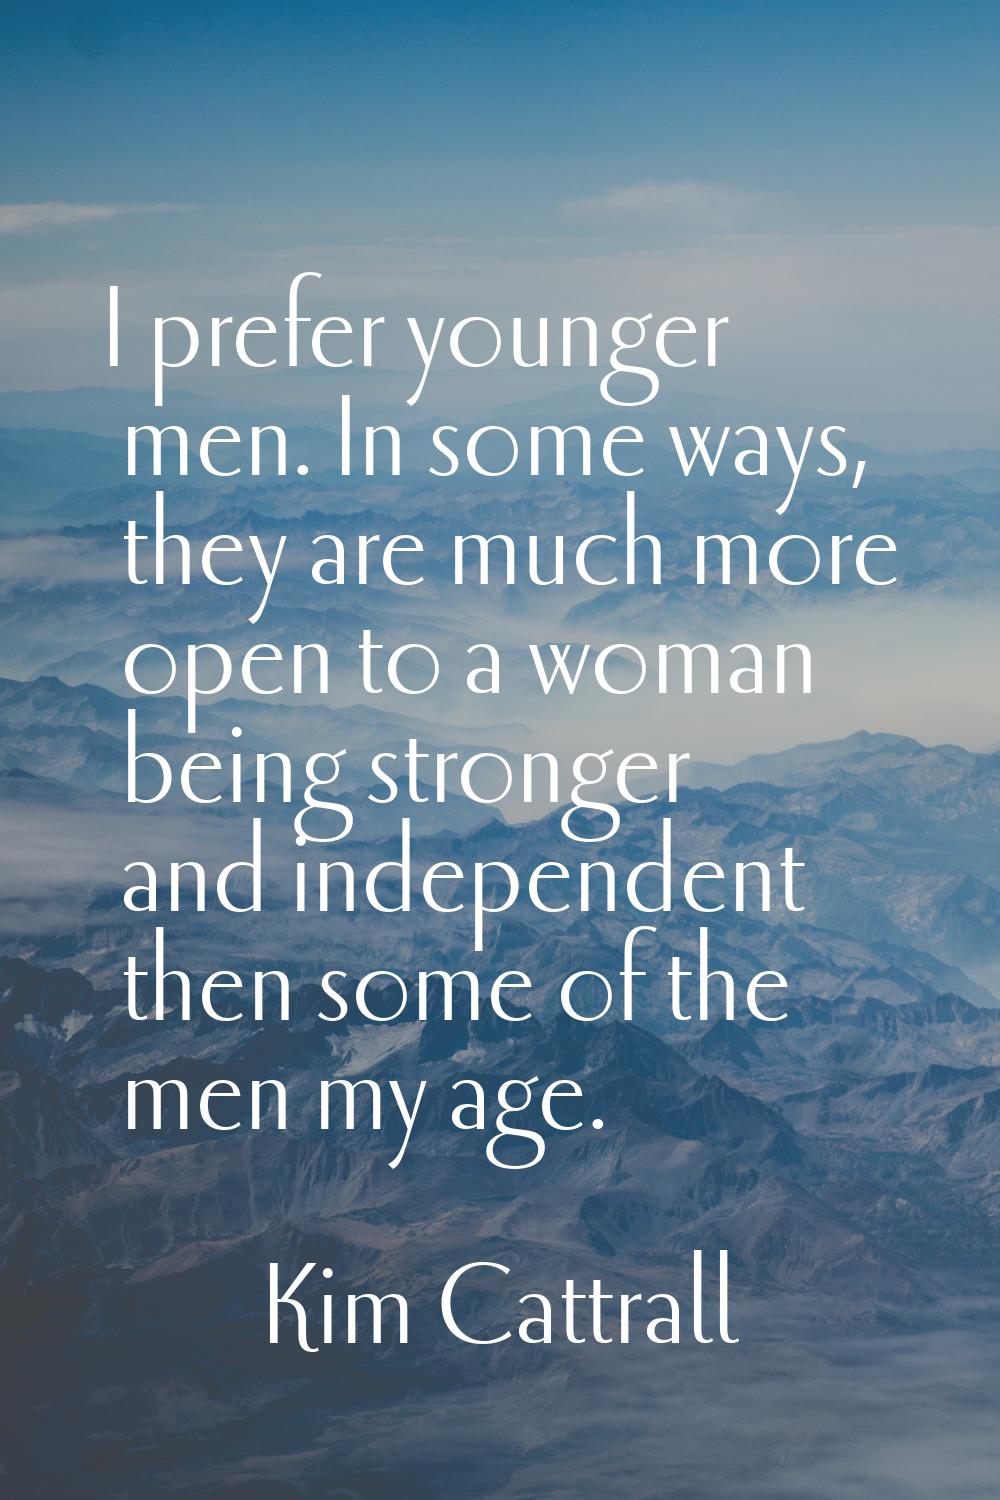 I prefer younger men. In some ways, they are much more open to a woman being stronger and independe